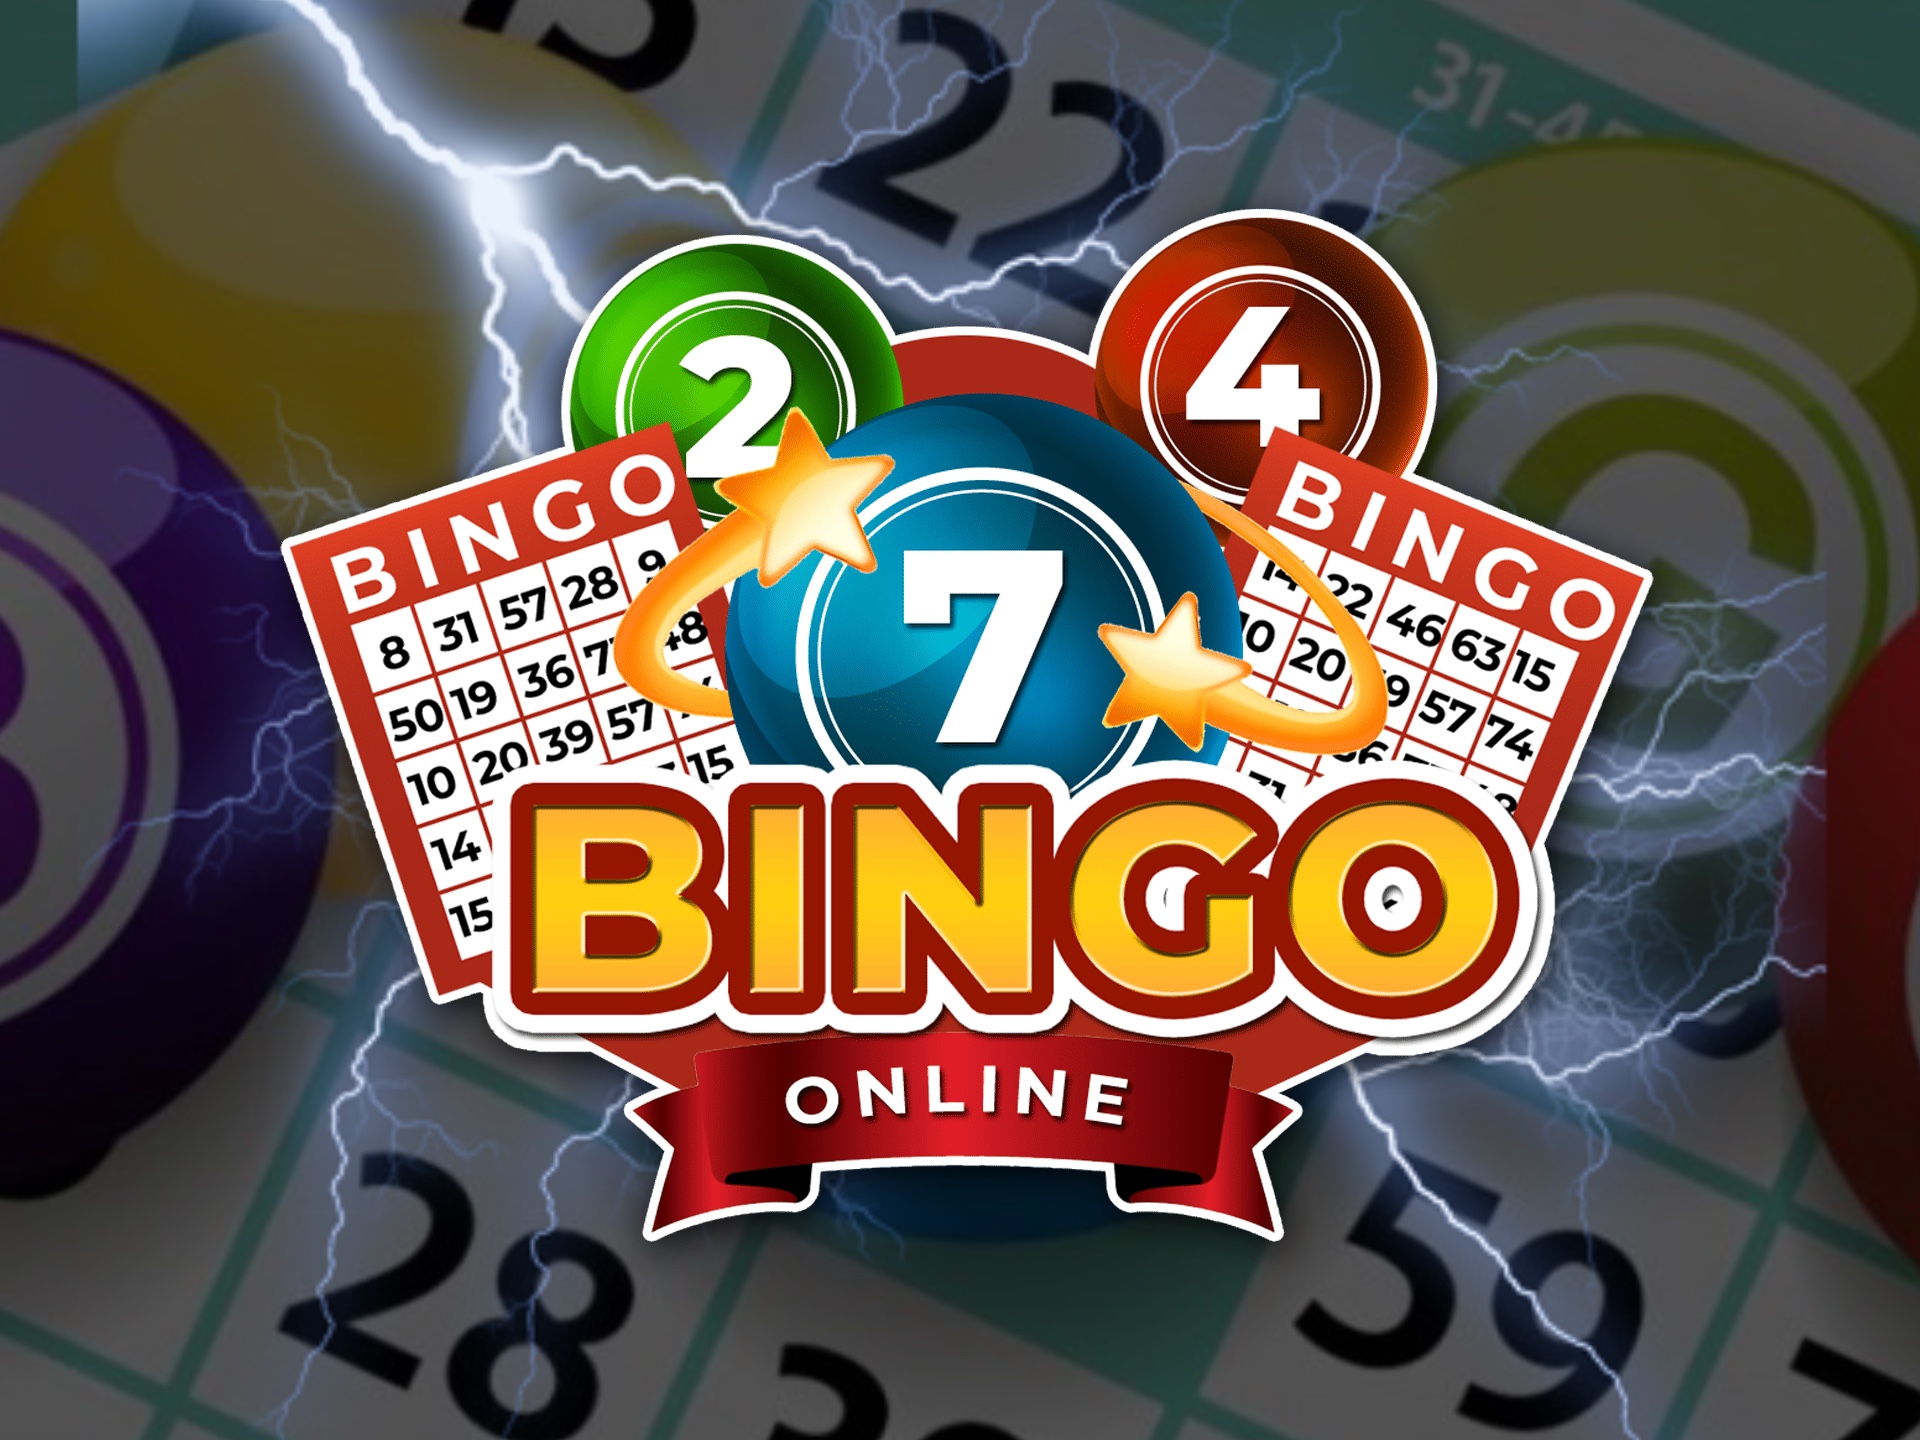 Sign up for an online casino and play online bingo.